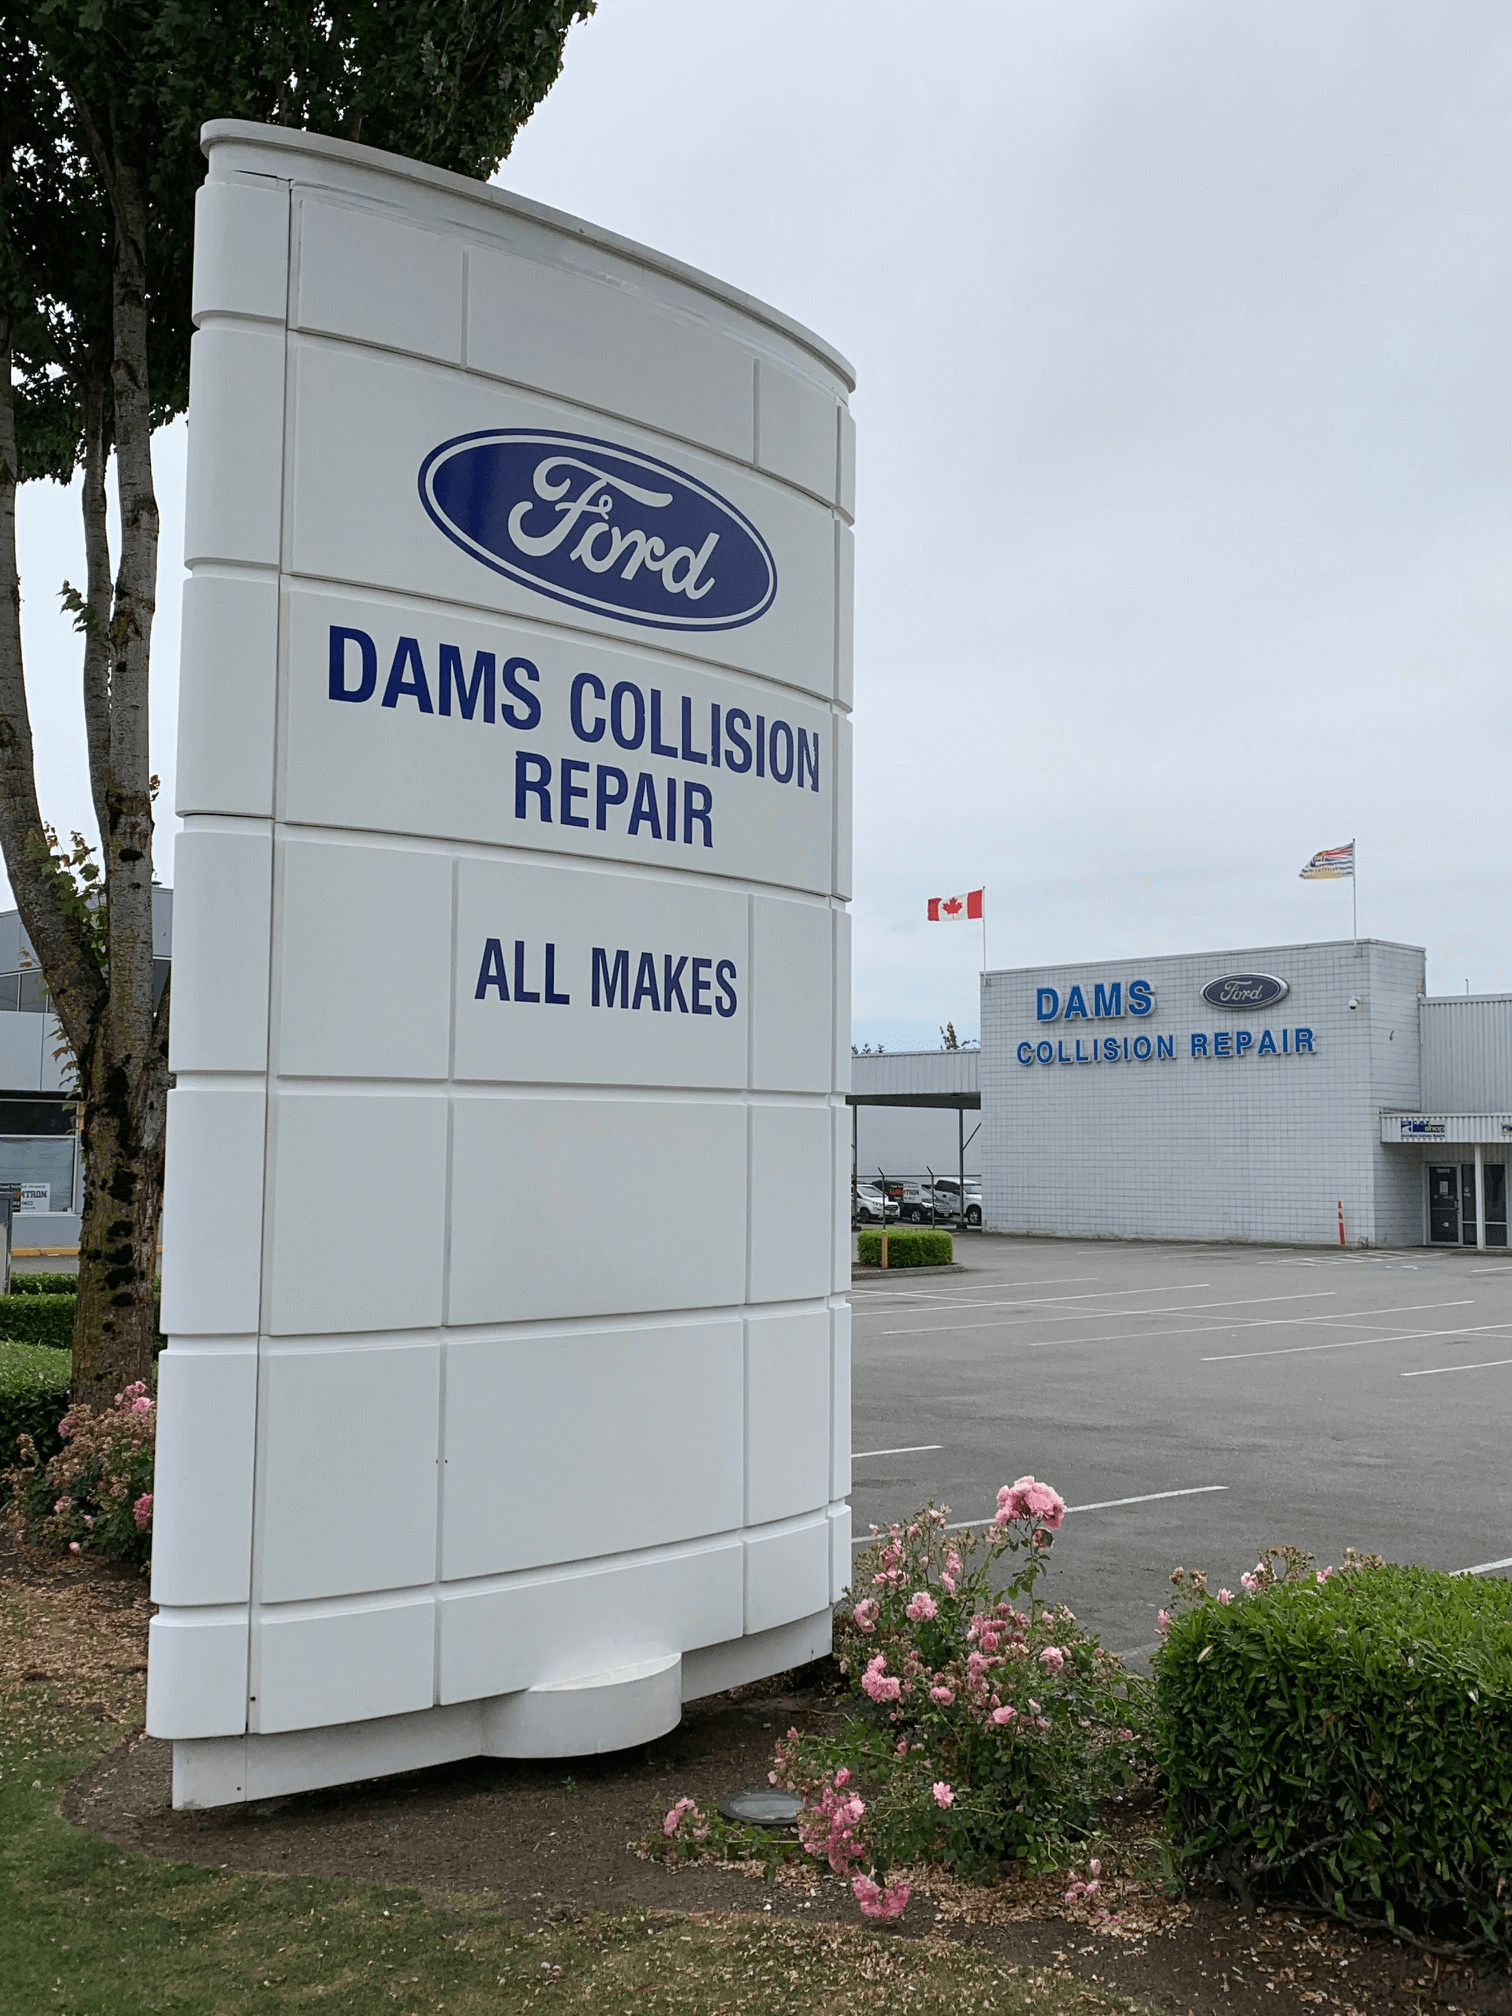 Contact Our Collision Repair Center | Dams Ford Lincoln